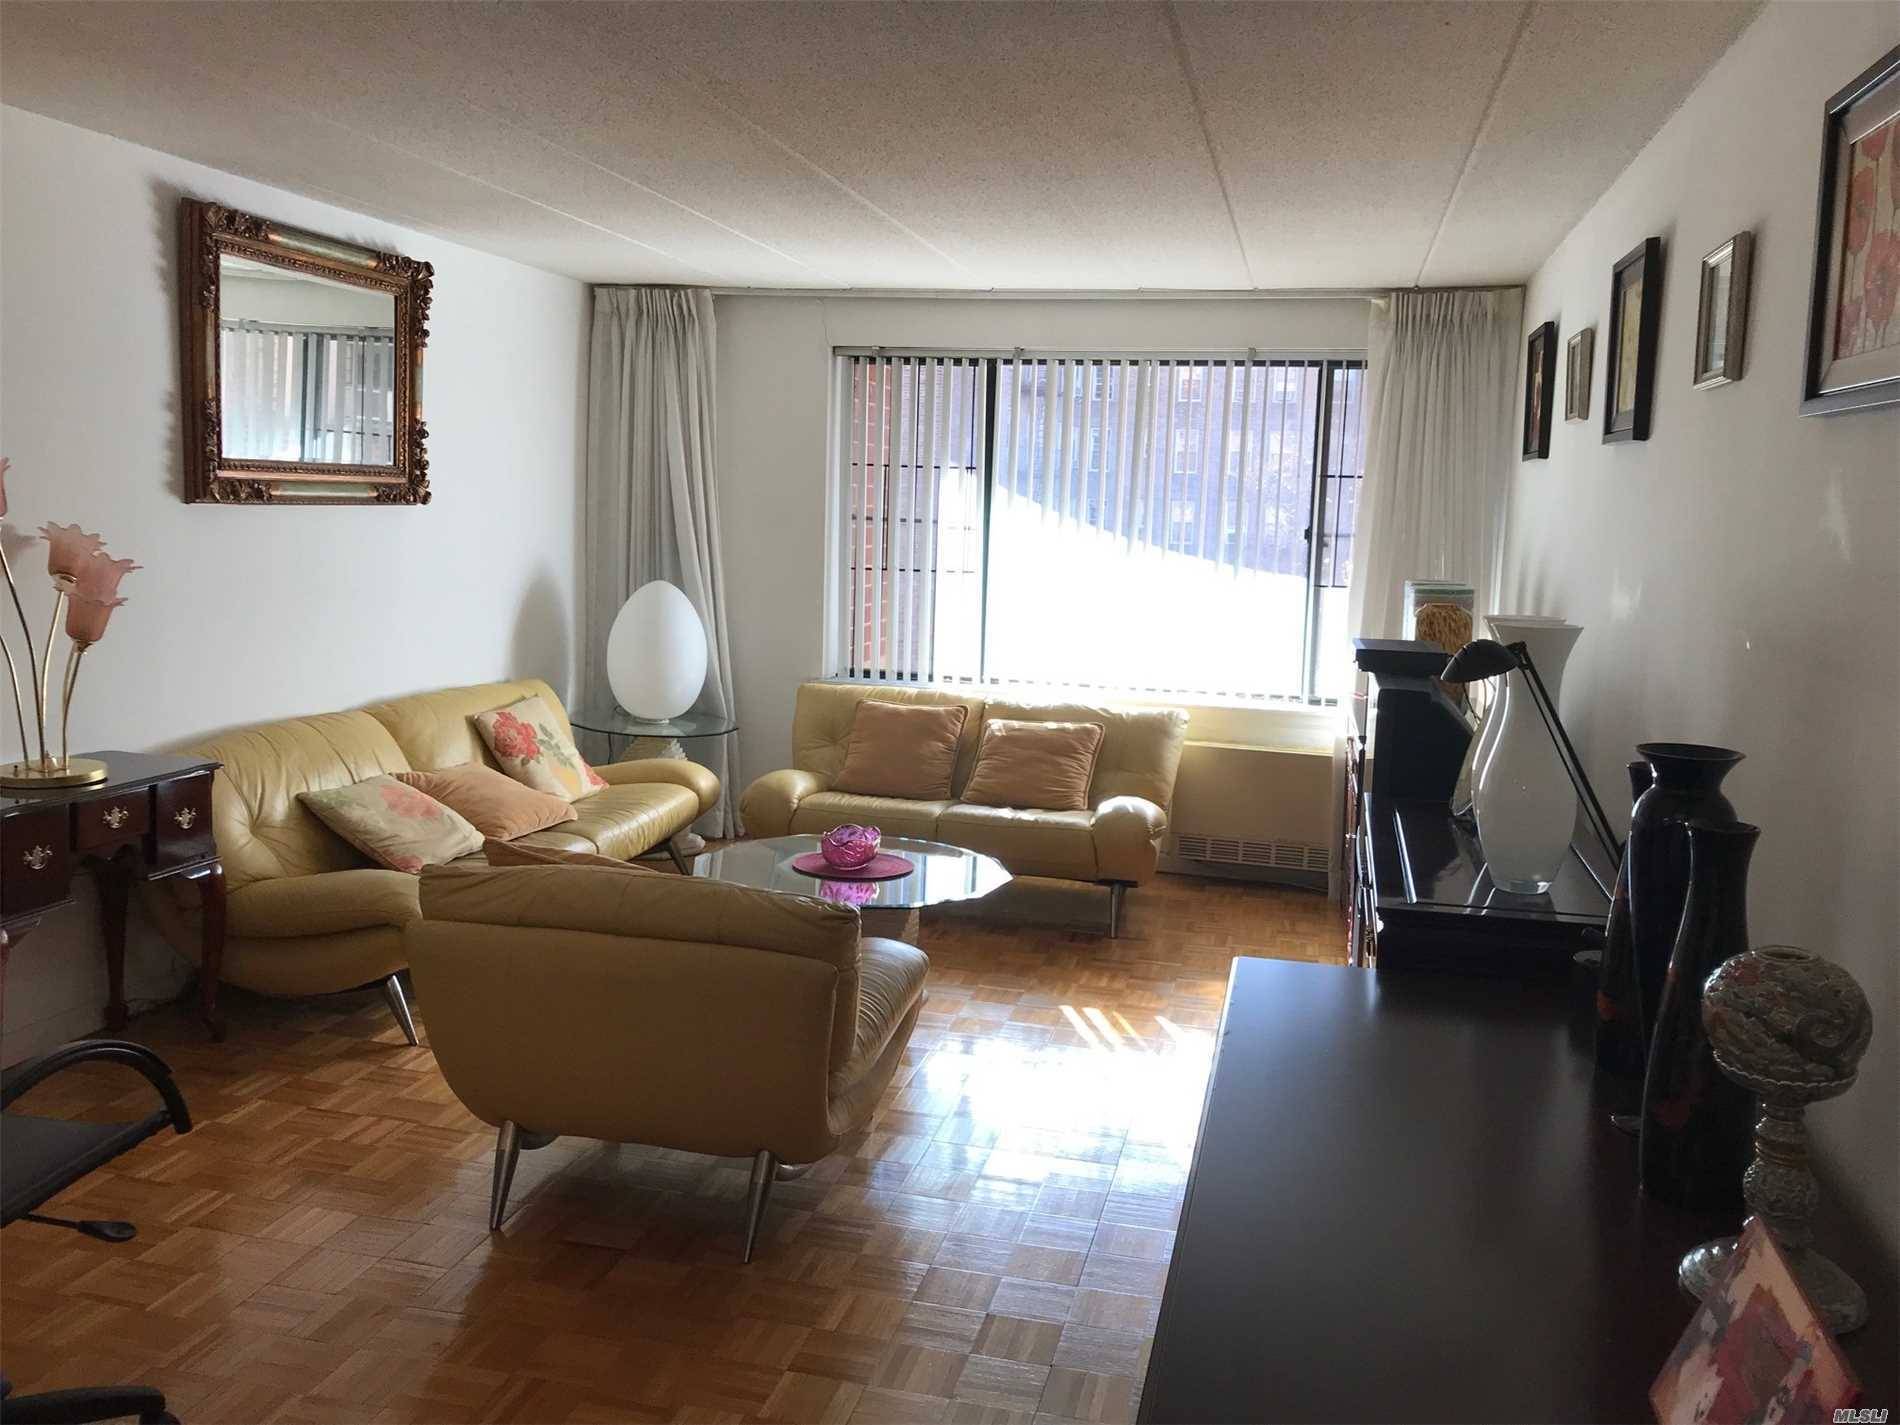 Perfectly Net 955 Sqft Full 2 Bedrooms 2 Baths Condo Unit Located In A Very Well-Maintained And Financially Sound Building.